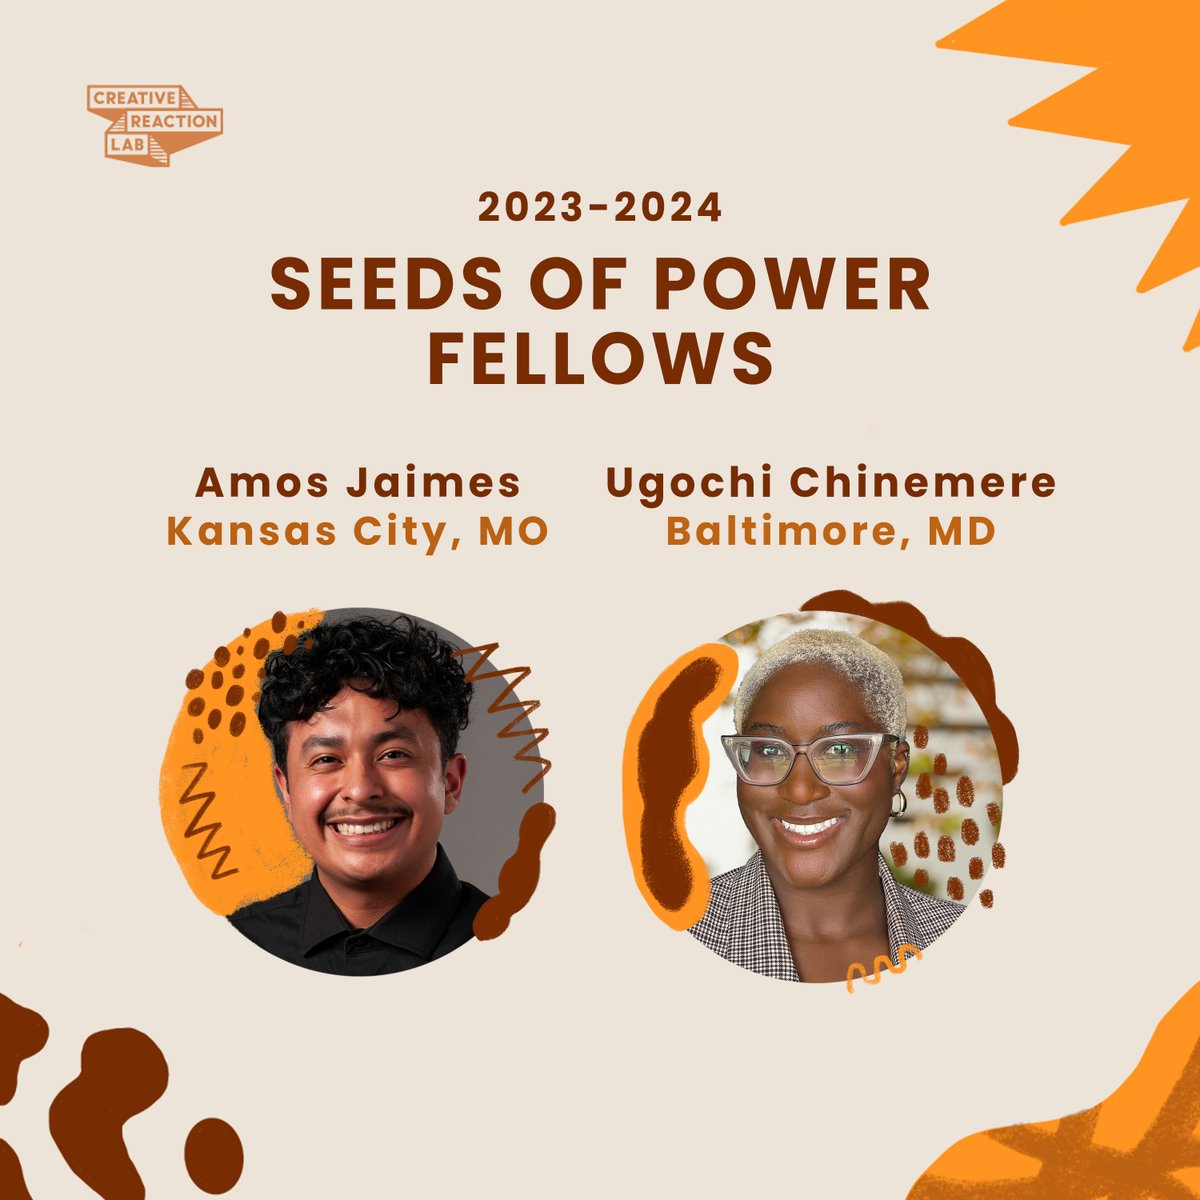 Introducing our dynamic Seeds of Power Fellows, Amos and Ugochi! Excited to witness the impact they'll make in the months ahead. #SeedsOfPower #PowerShifters 👏